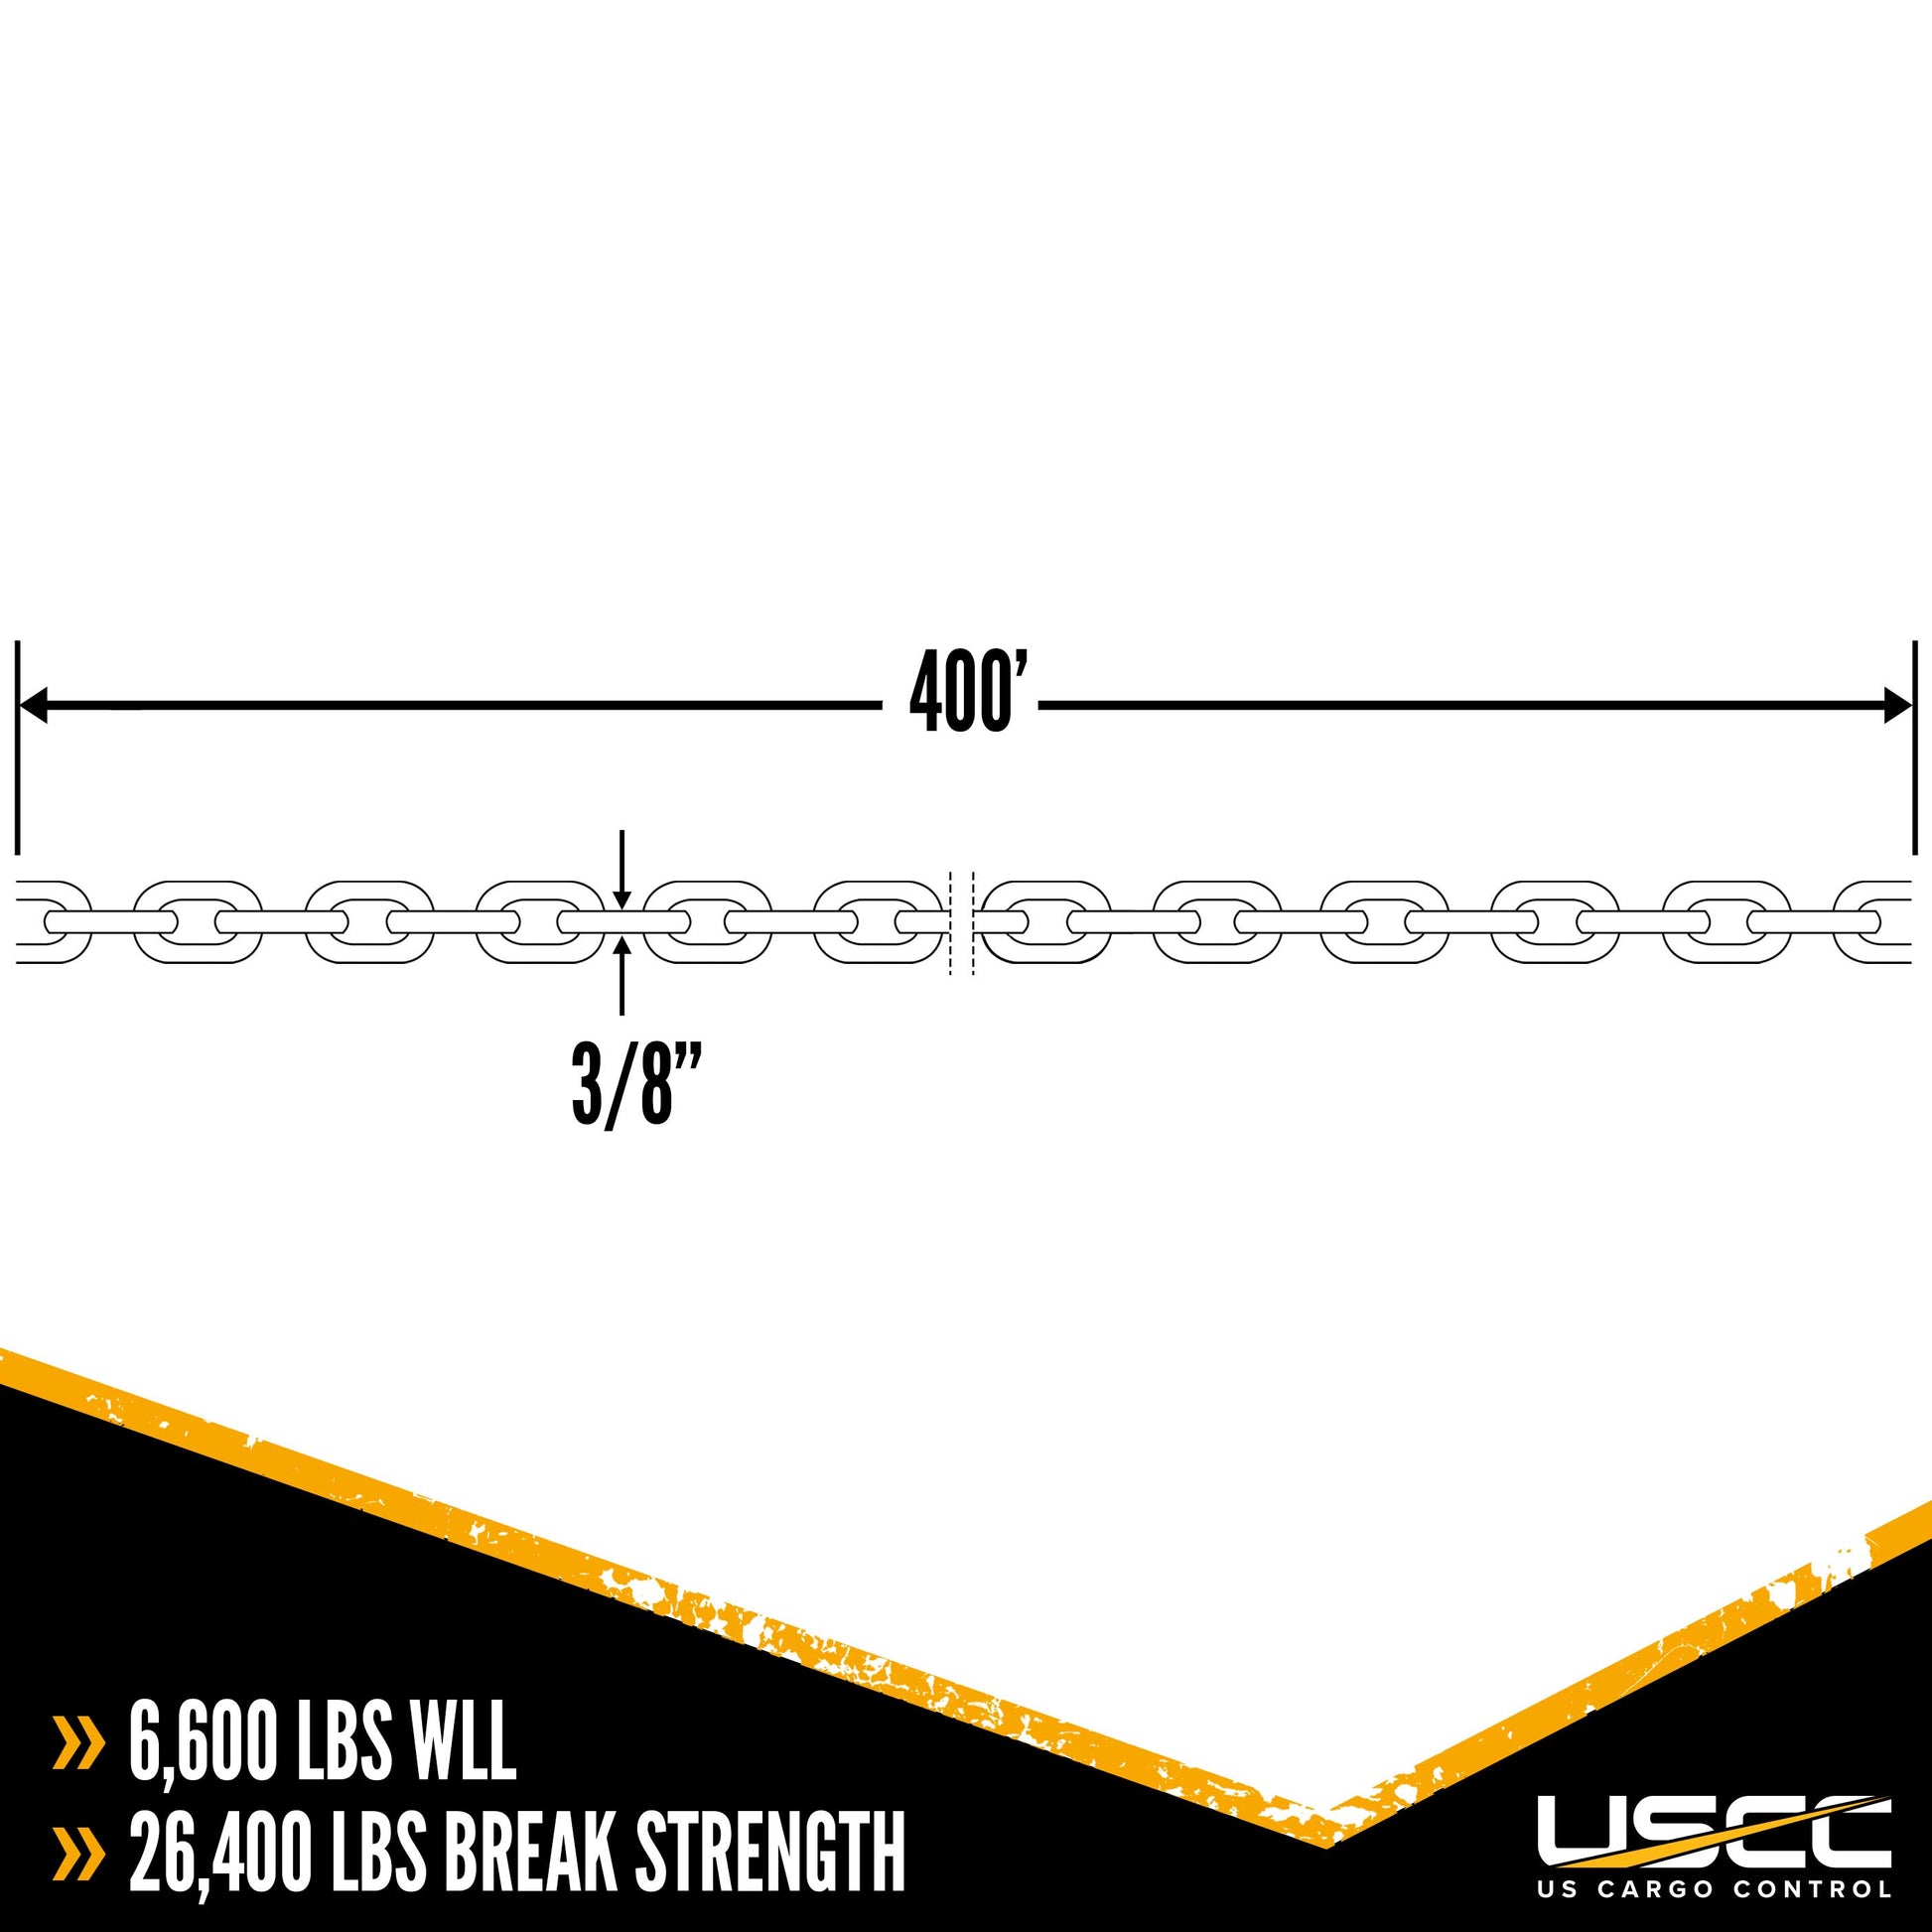 12 inch x 200 foot CM Transport Chain Drum Grade 70 image 4 of 7